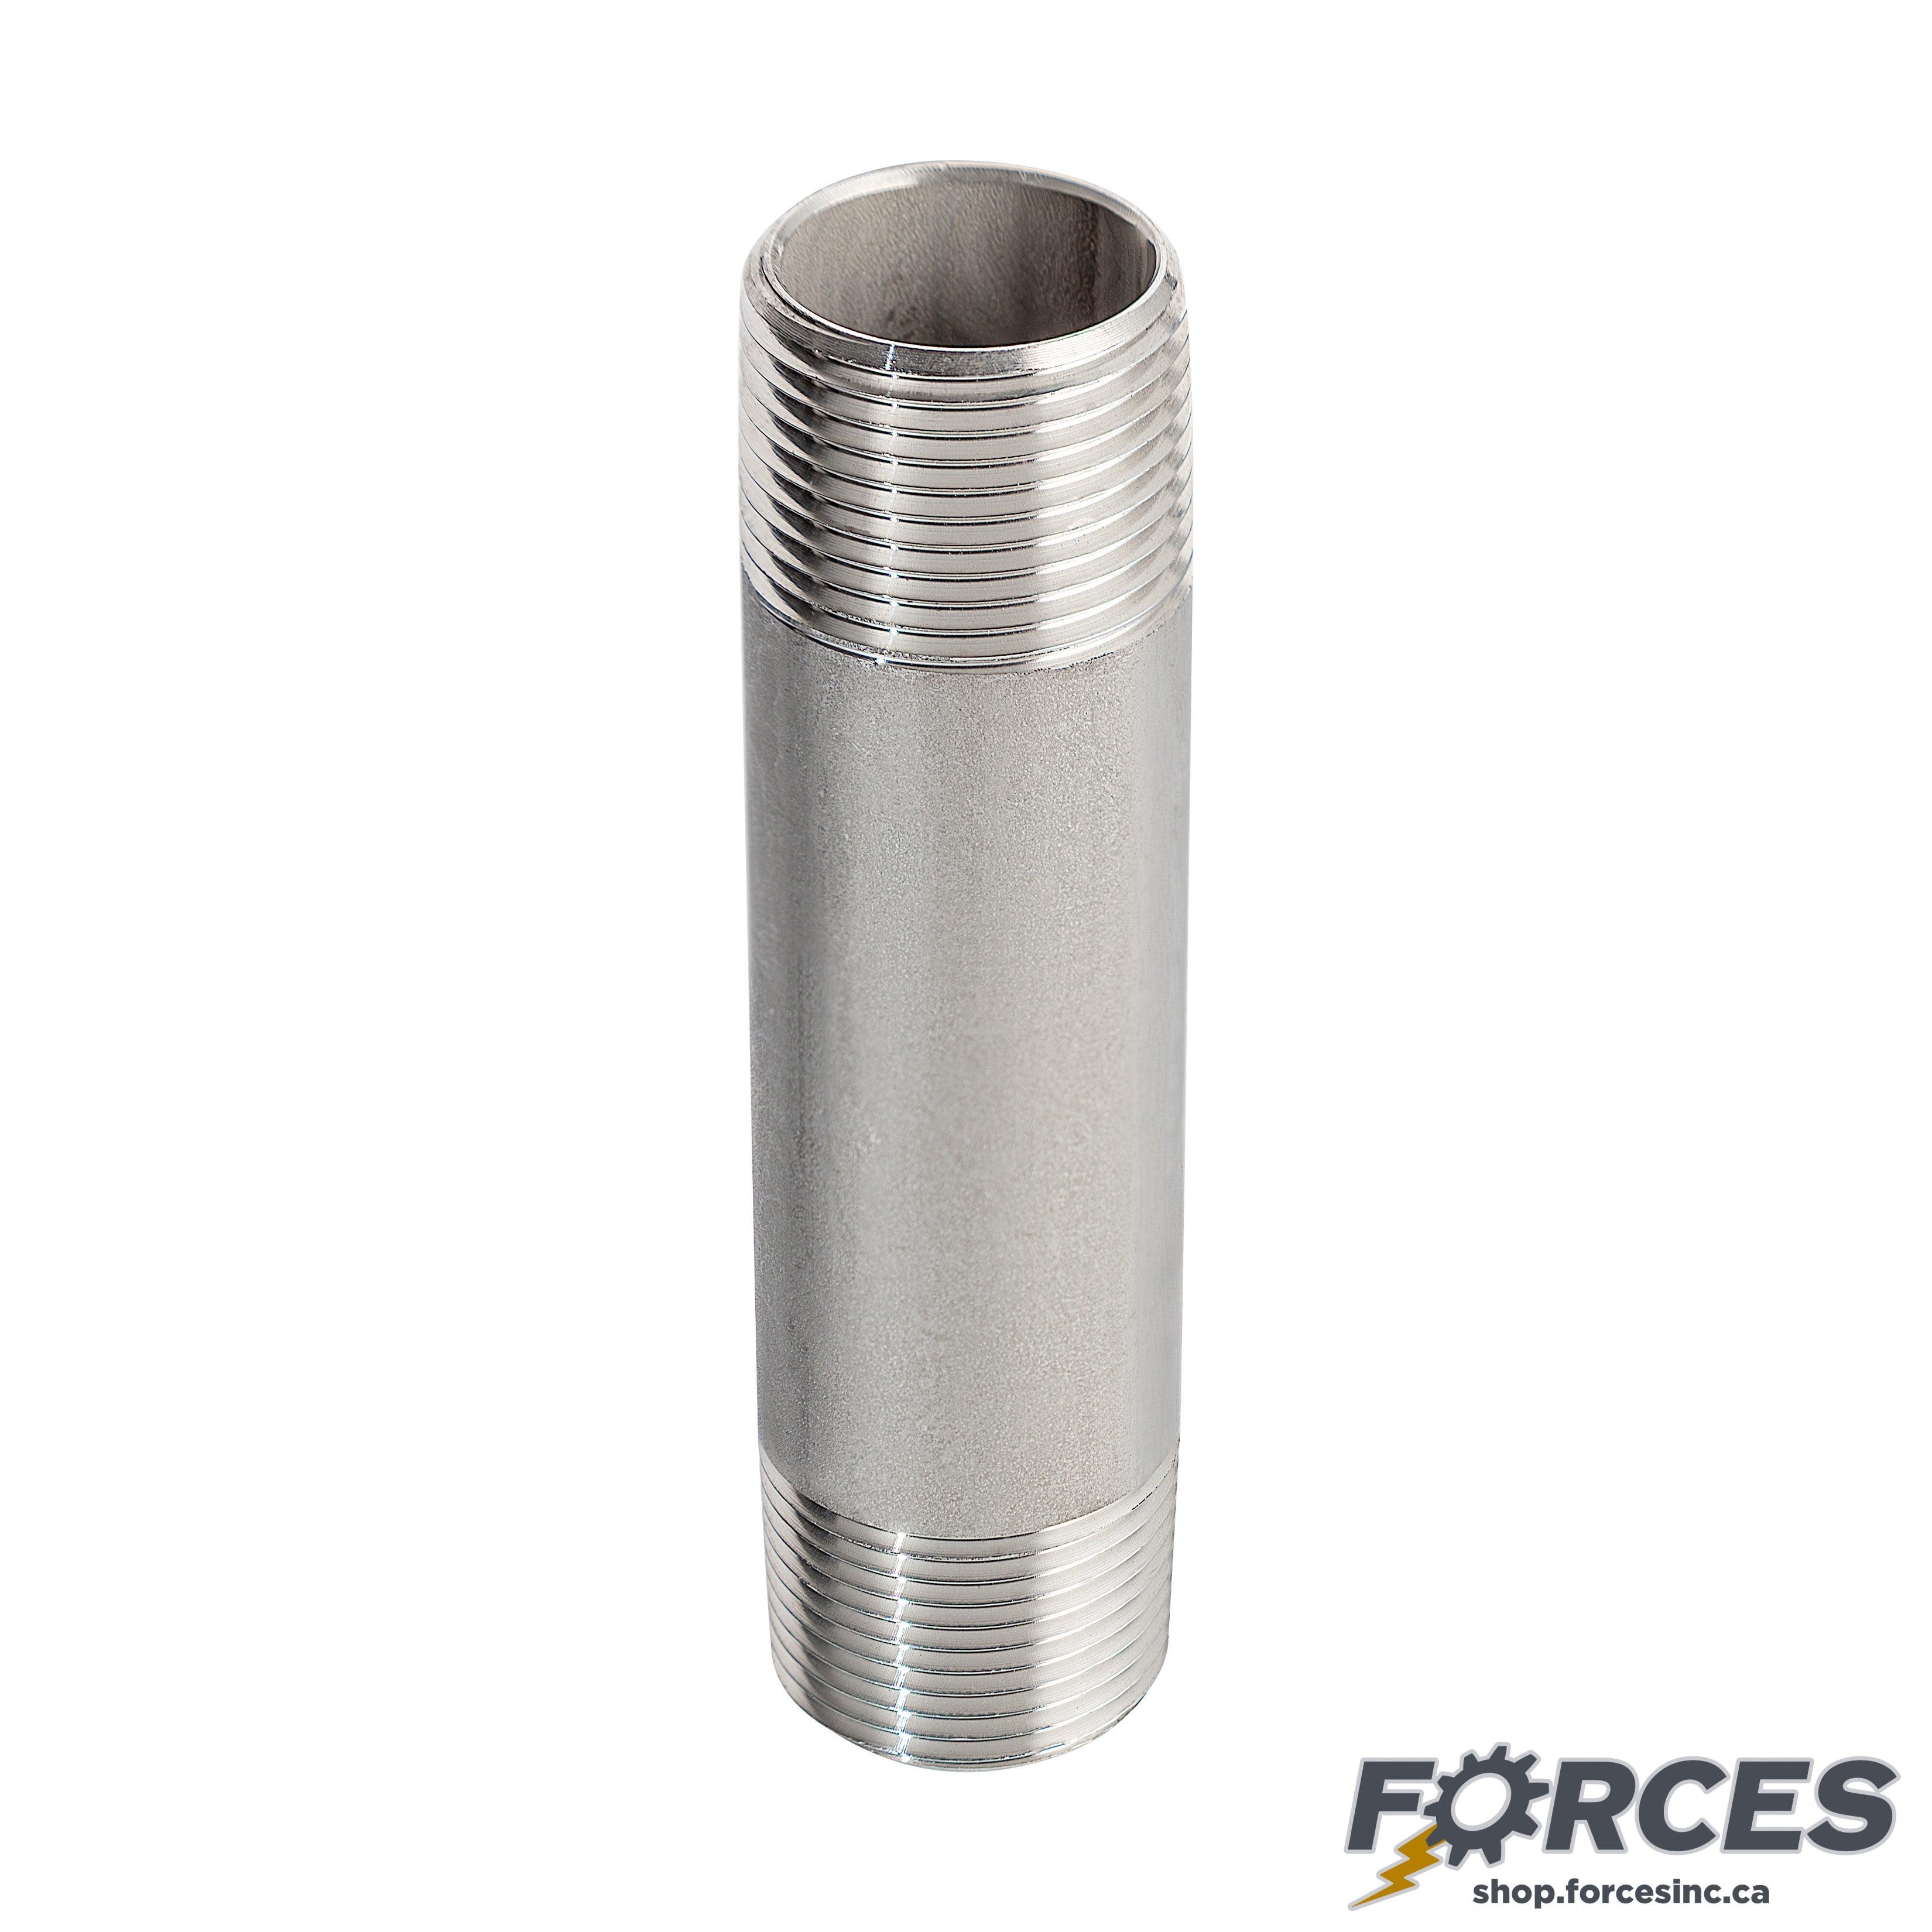 3/4" X 3" Long Nipple - Stainless Steel 316 - Forces Inc